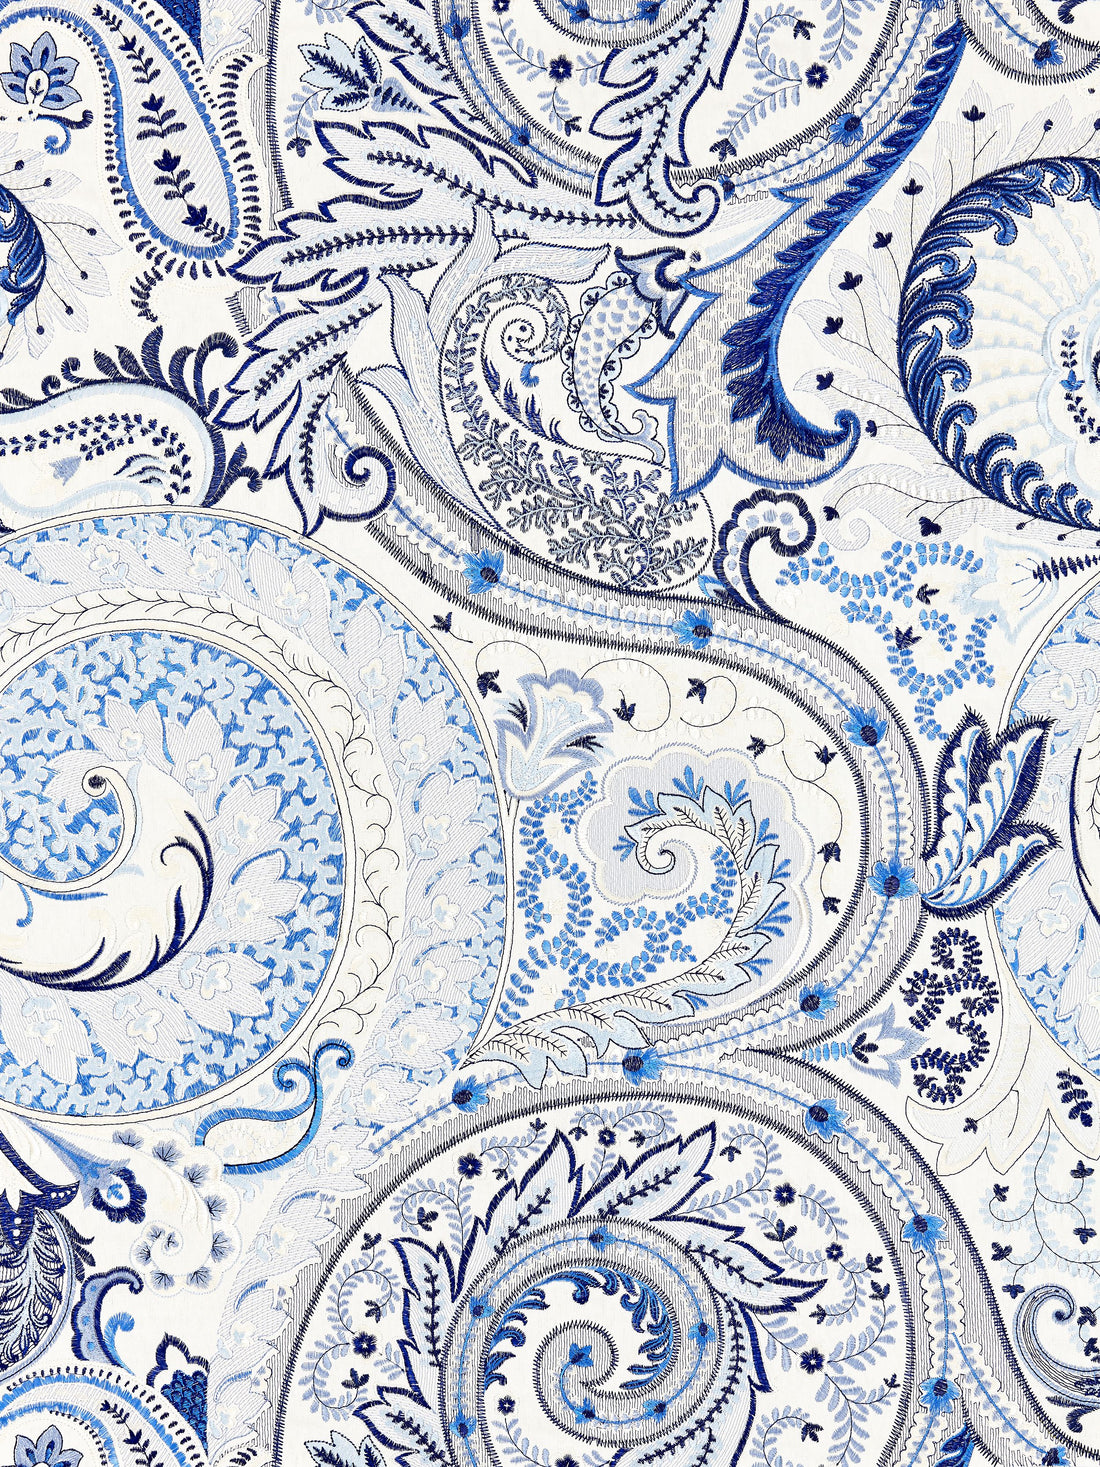 Malabar Paisley Embroidery fabric in porcelain color - pattern number SC 000227124 - by Scalamandre in the Scalamandre Fabrics Book 1 collection